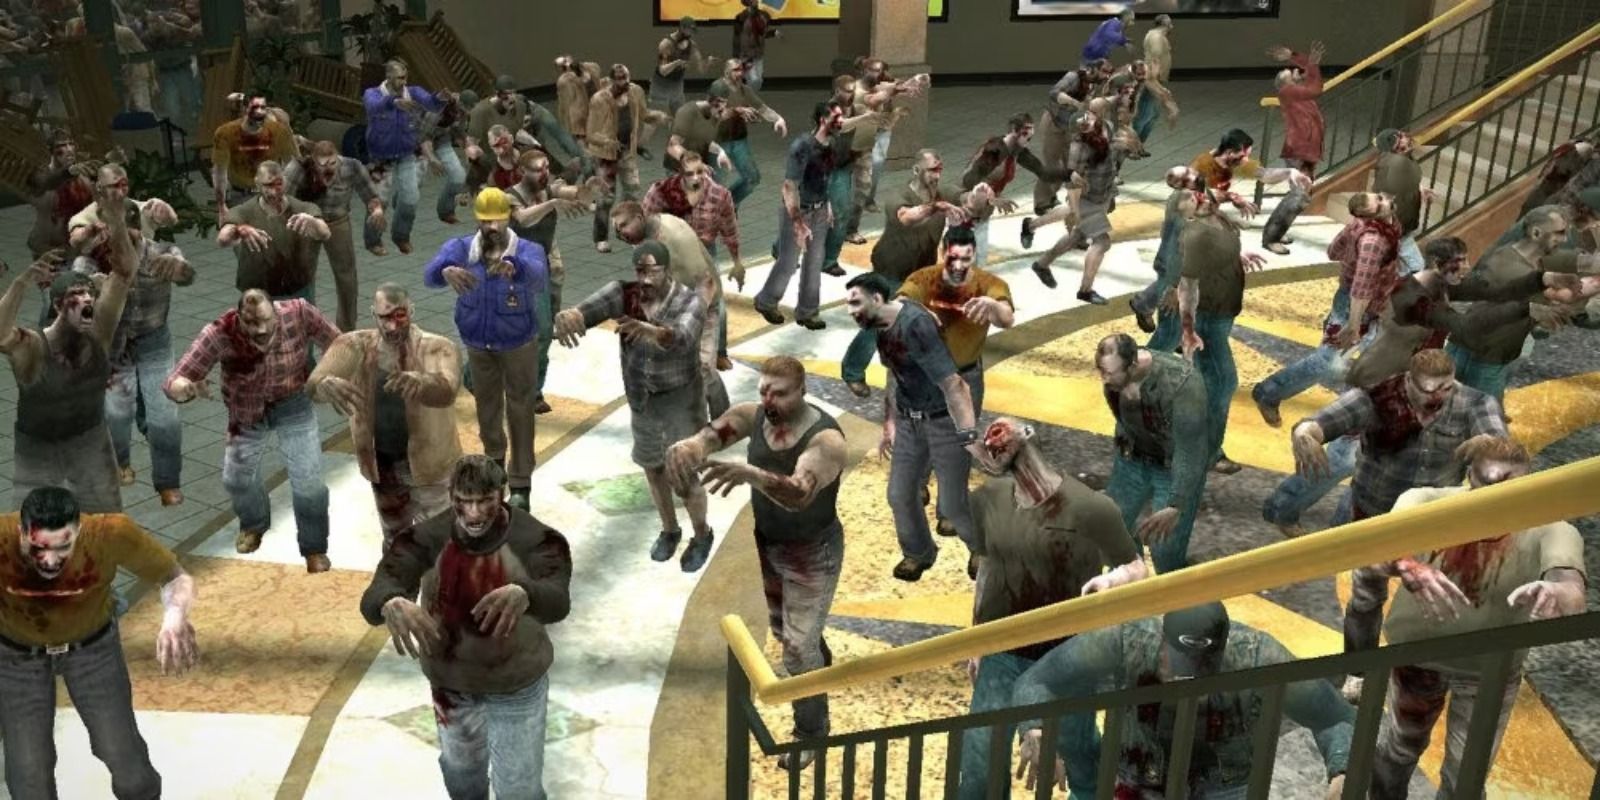 Dead Rising group of zombies in shopping mall